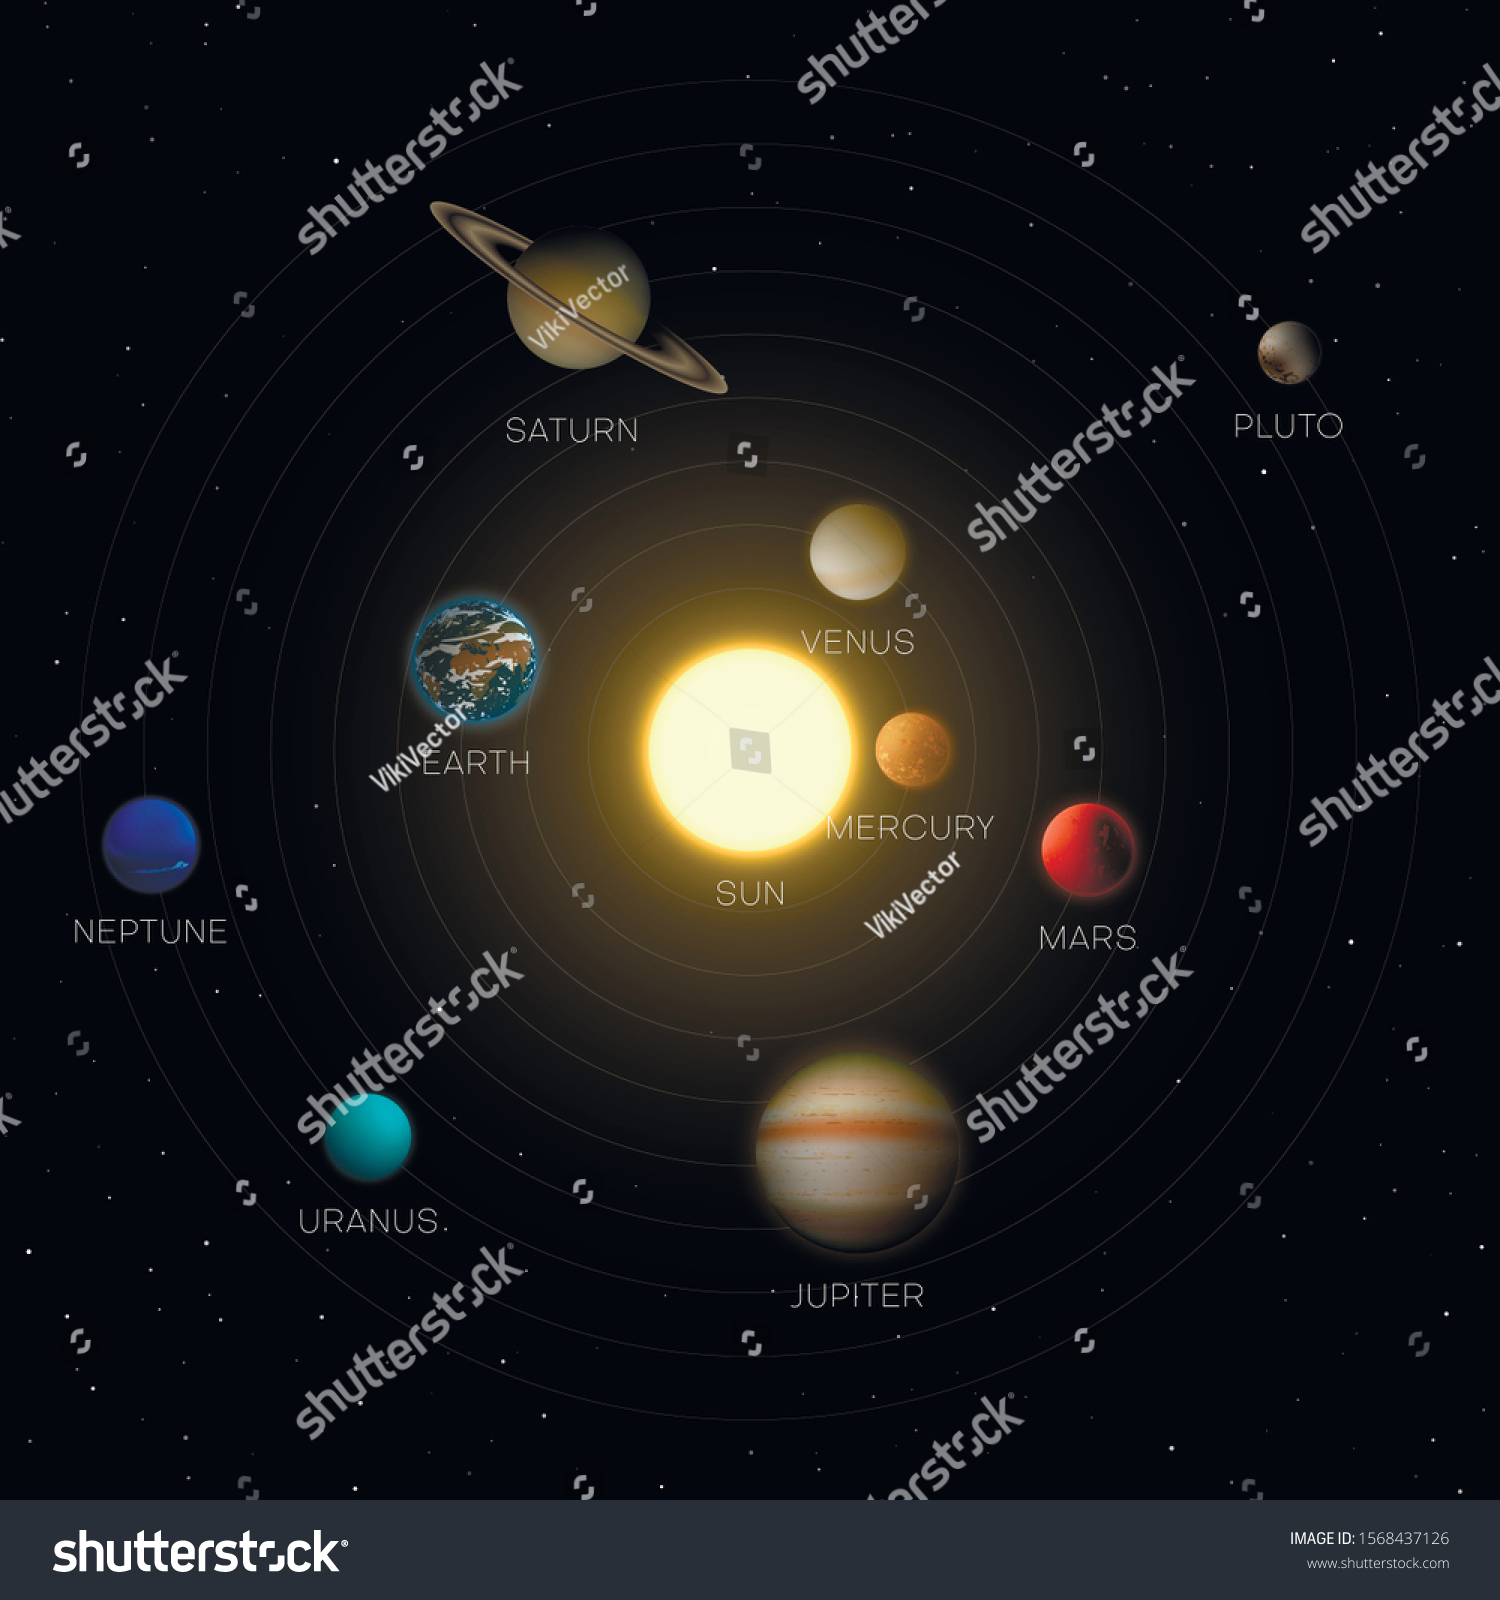 the placement of the planets around the sun